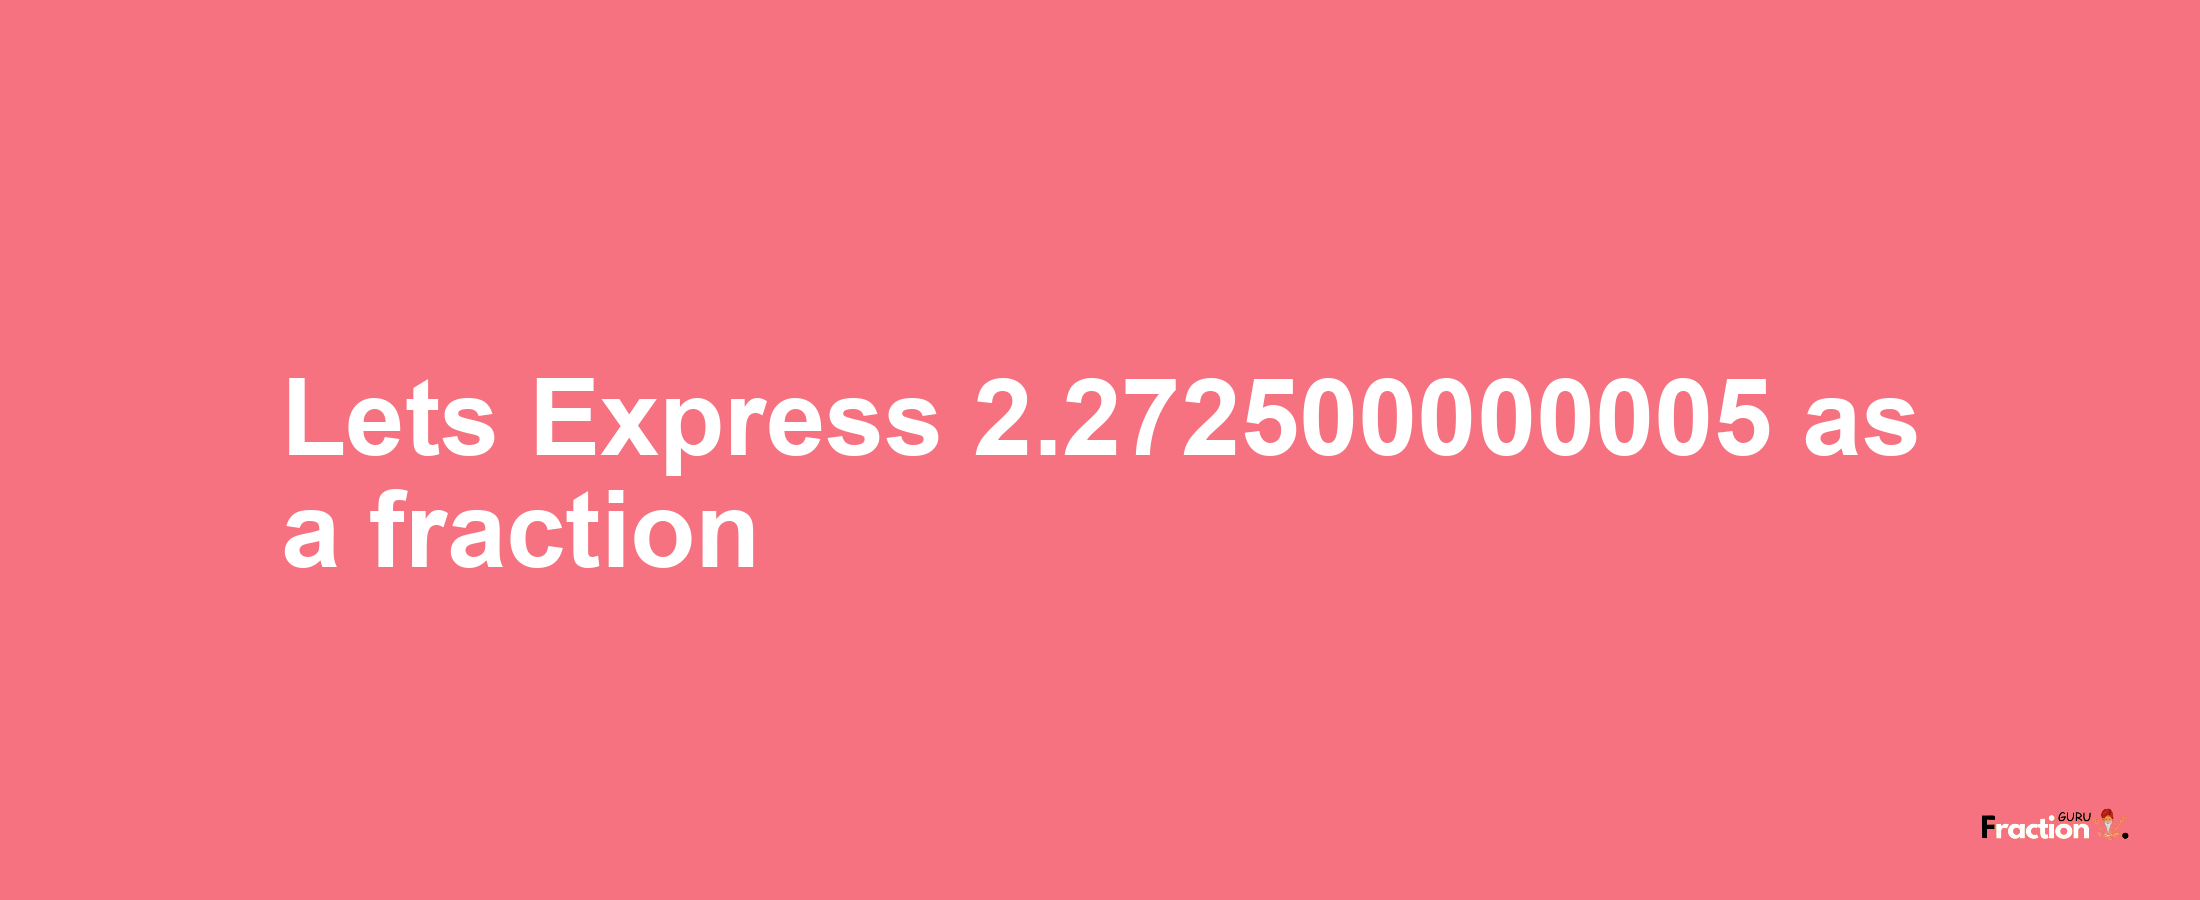 Lets Express 2.272500000005 as afraction